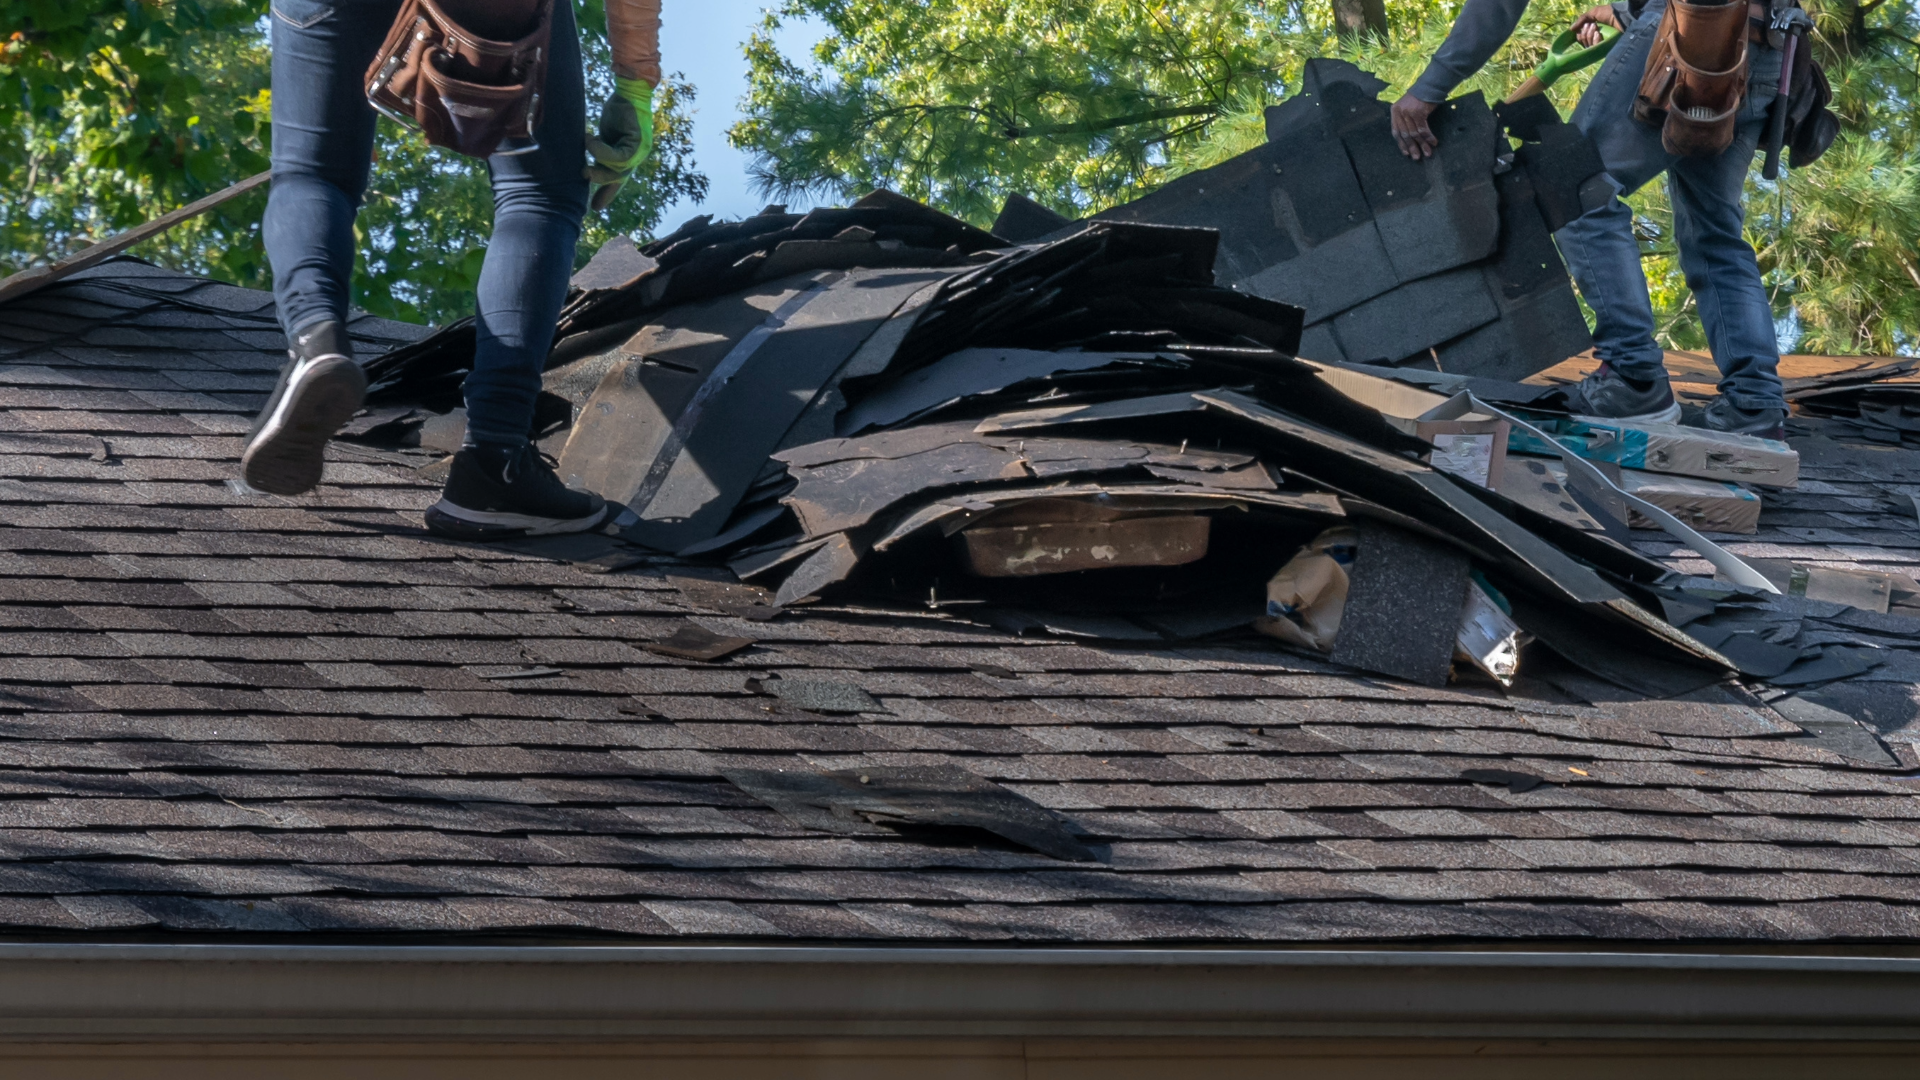 Roofers remove old shingles to toss in construction dumpsters for removal.